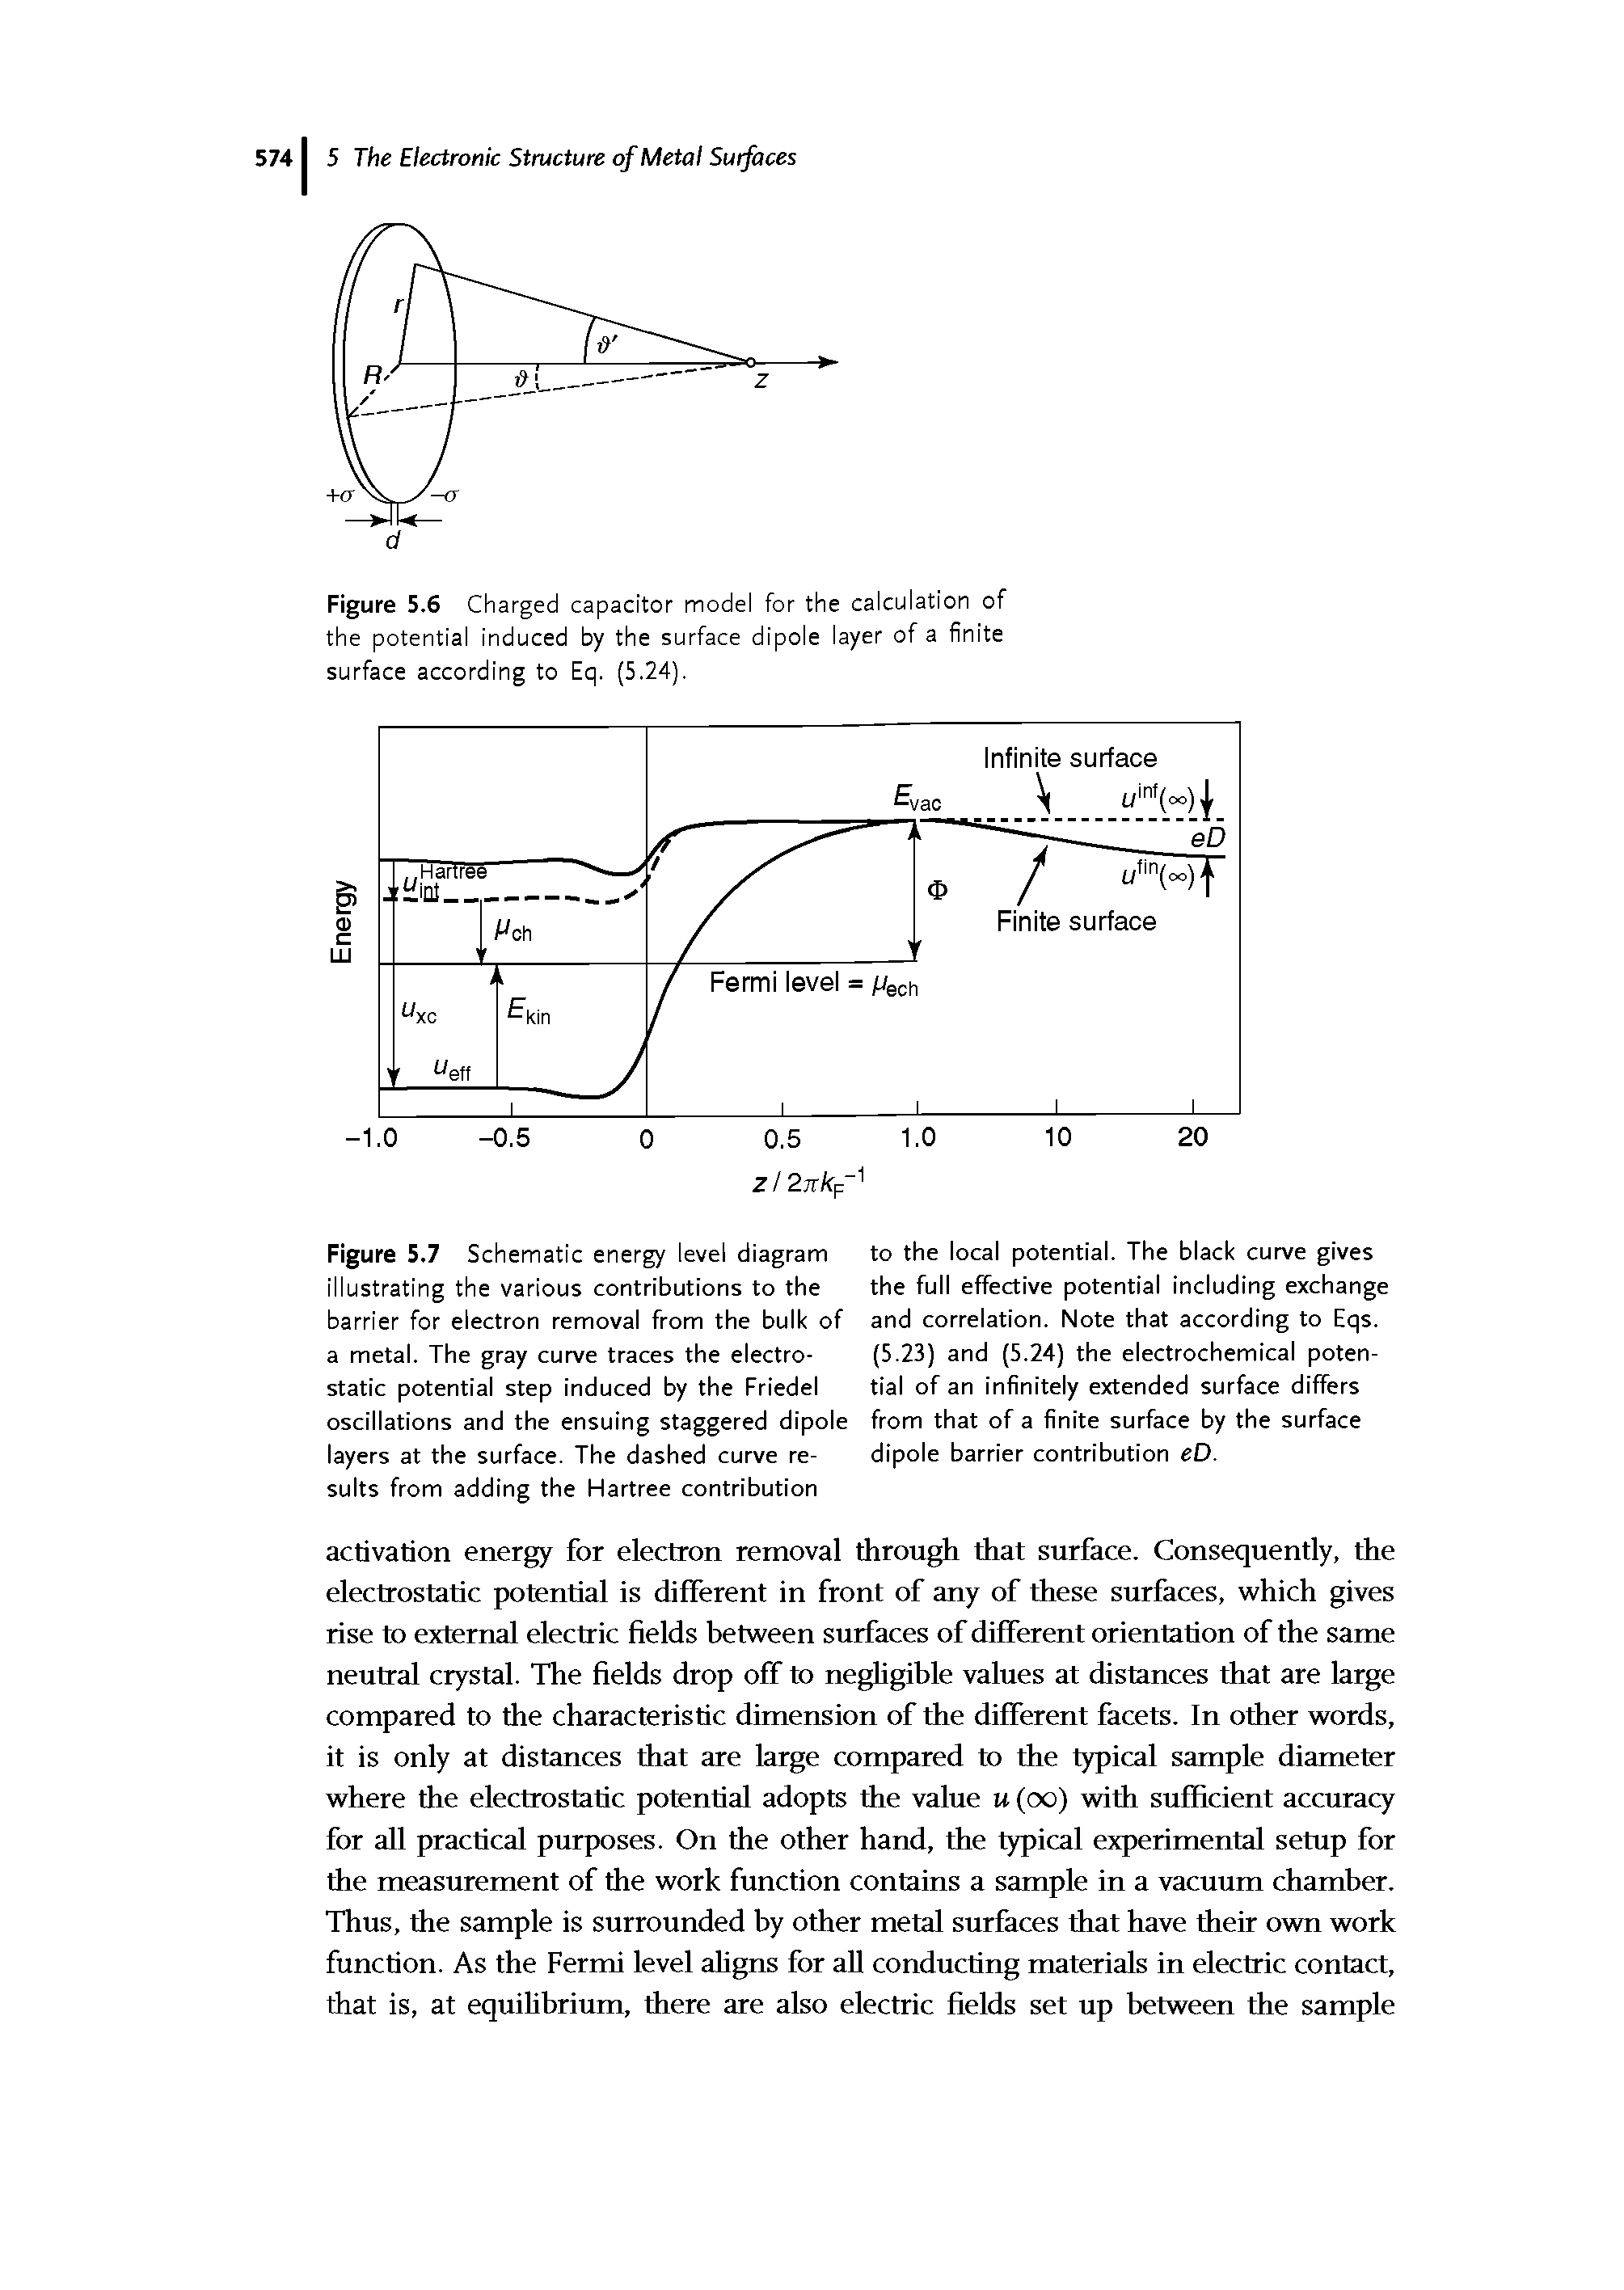 Figure 5.7 Schematic energy level diagram illustrating the various contributions to the barrier for electron removal from the bulk of a metal. The gray curve traces the electrostatic potential step induced by the Friedel oscillations and the ensuing staggered dipole layers at the surface. The dashed curve results from adding the Hartree contribution...